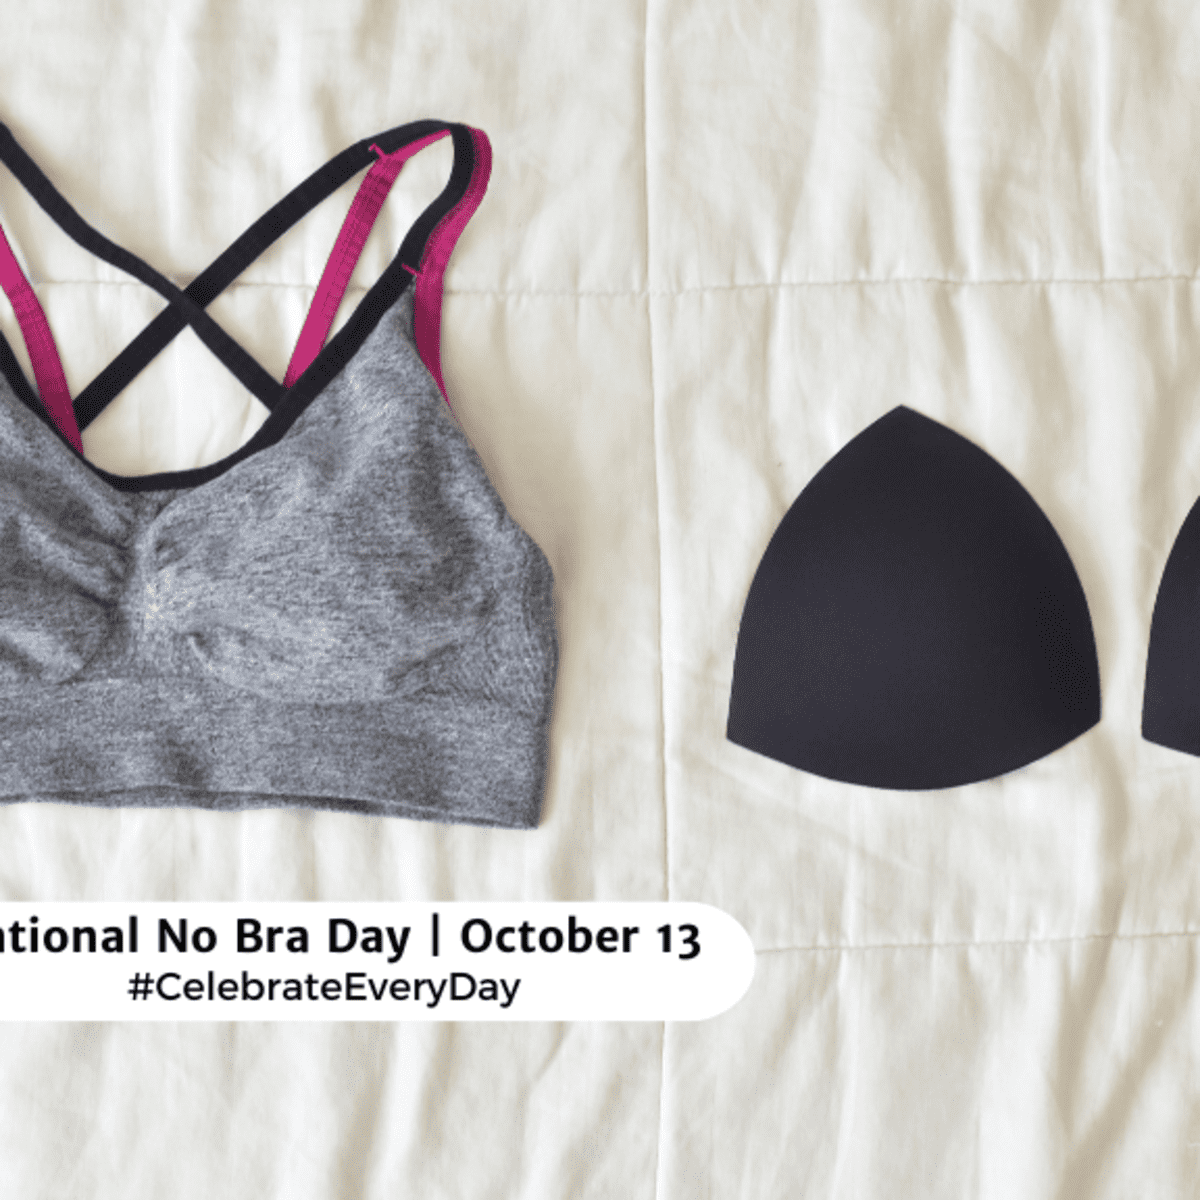 Today is NO BRA day. You are encouraged to go bra-less in an